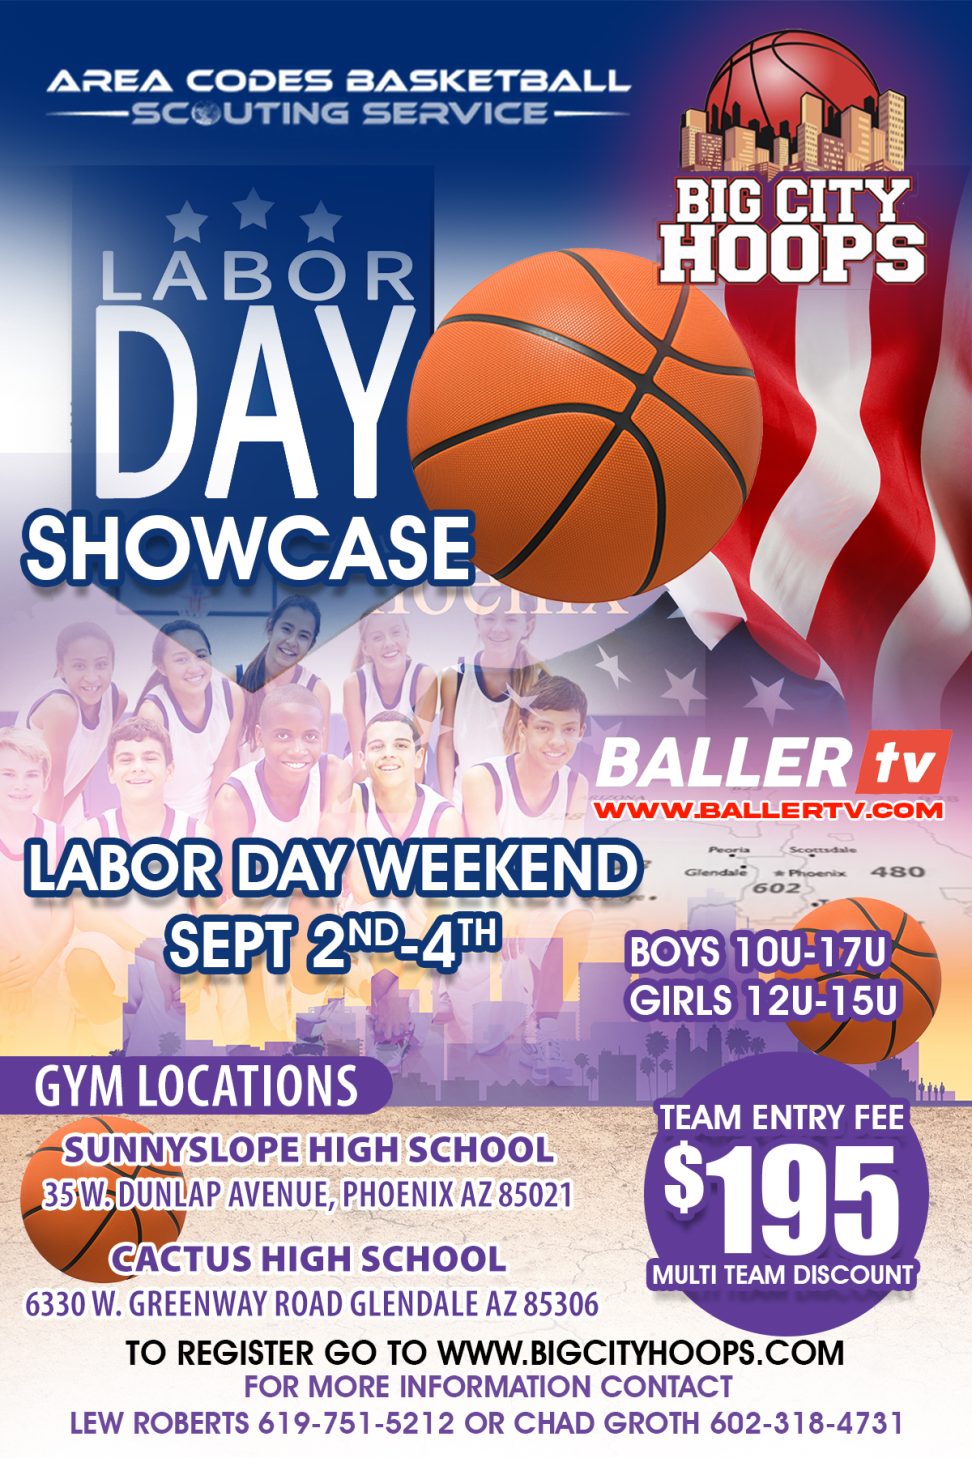 A poster for the labor day showcase.